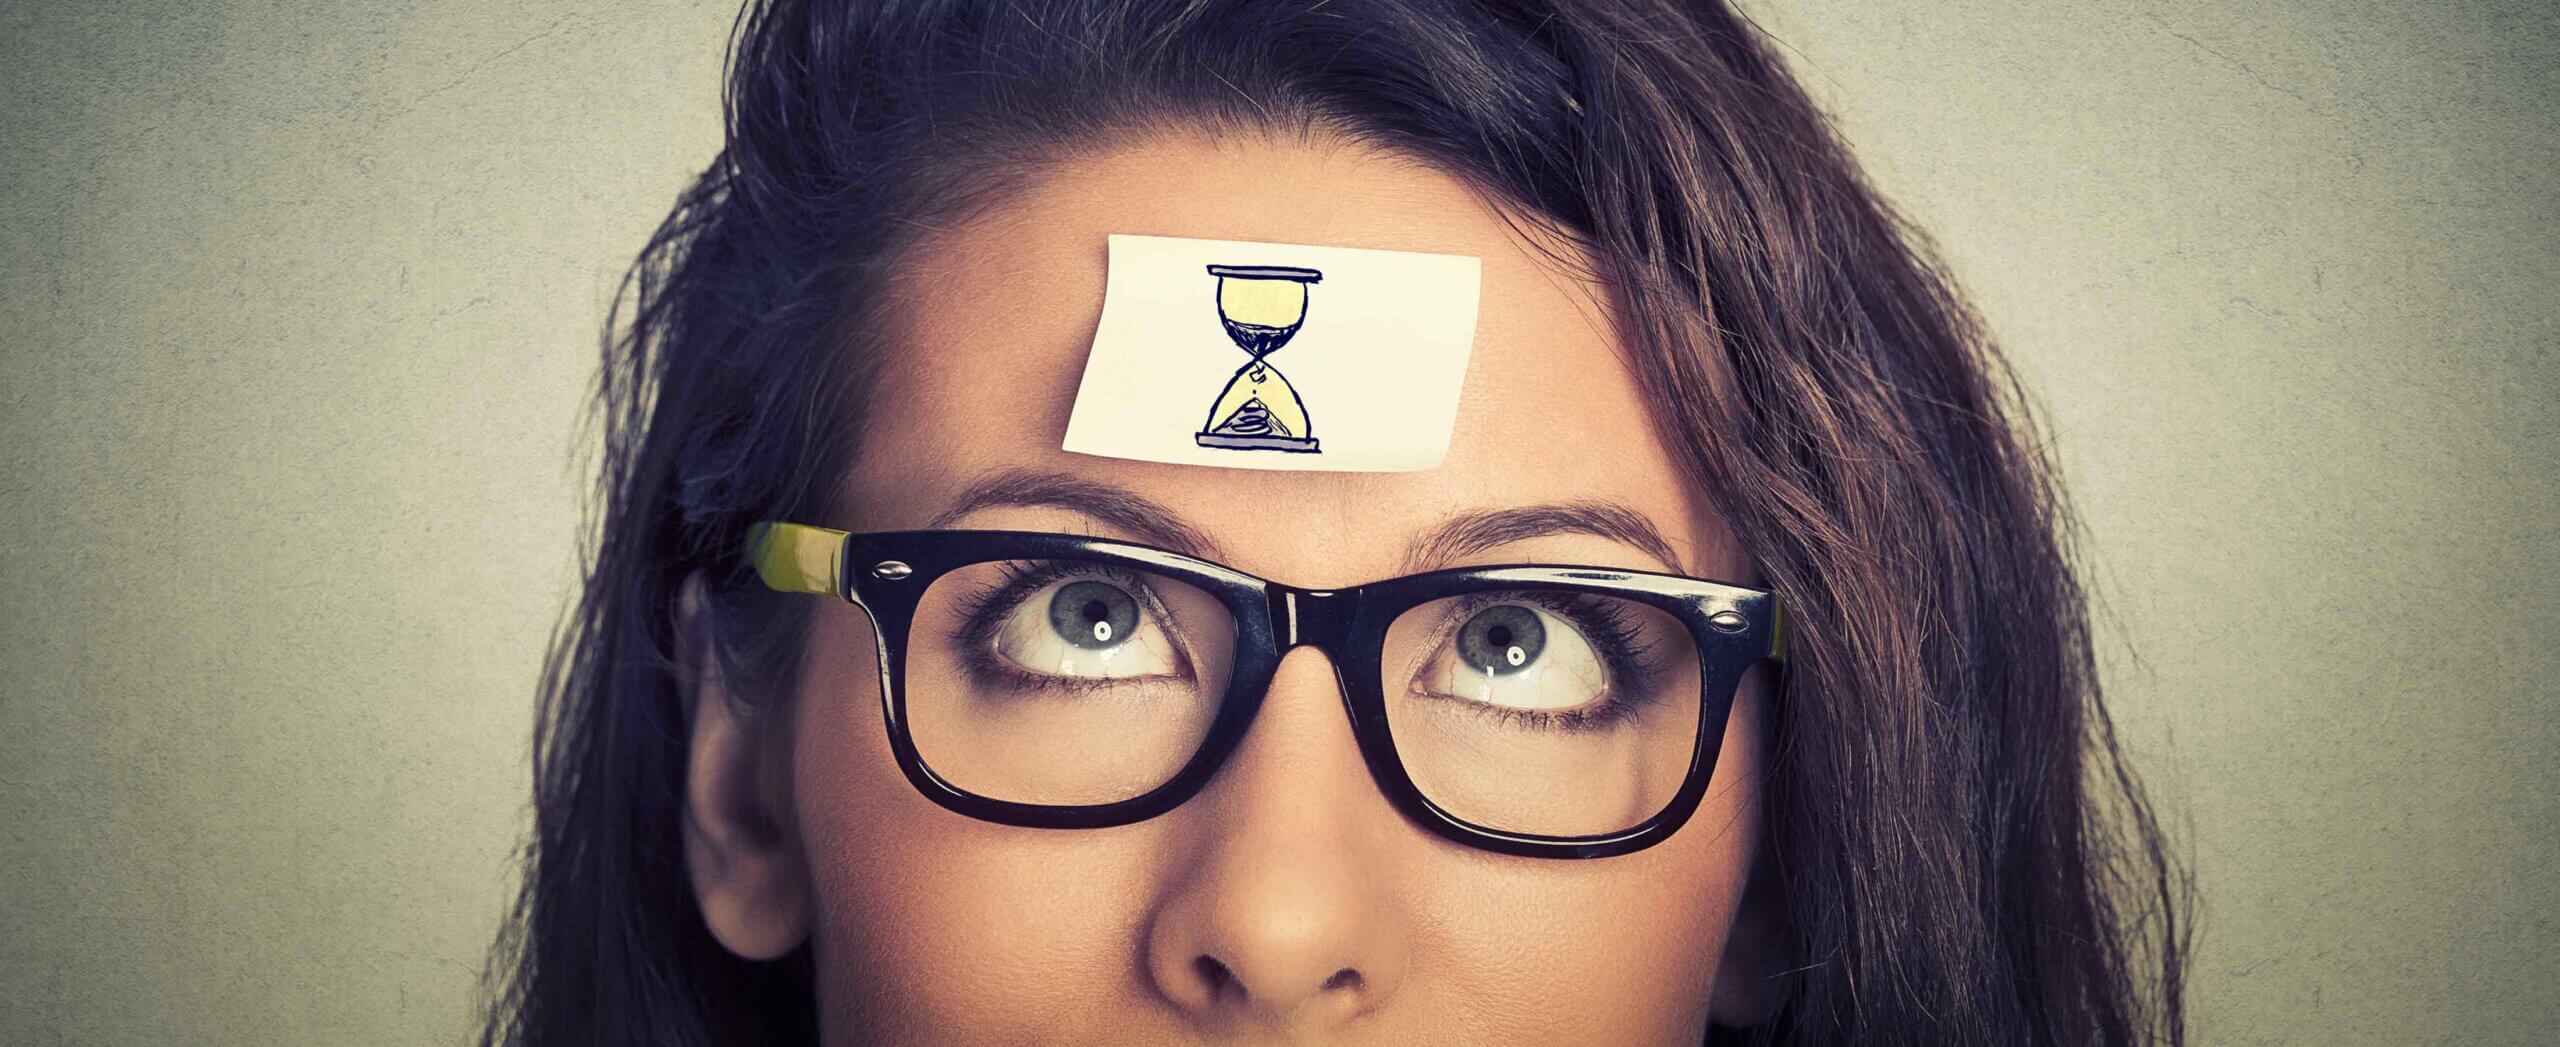 Woman looking at time sticker on her forehead